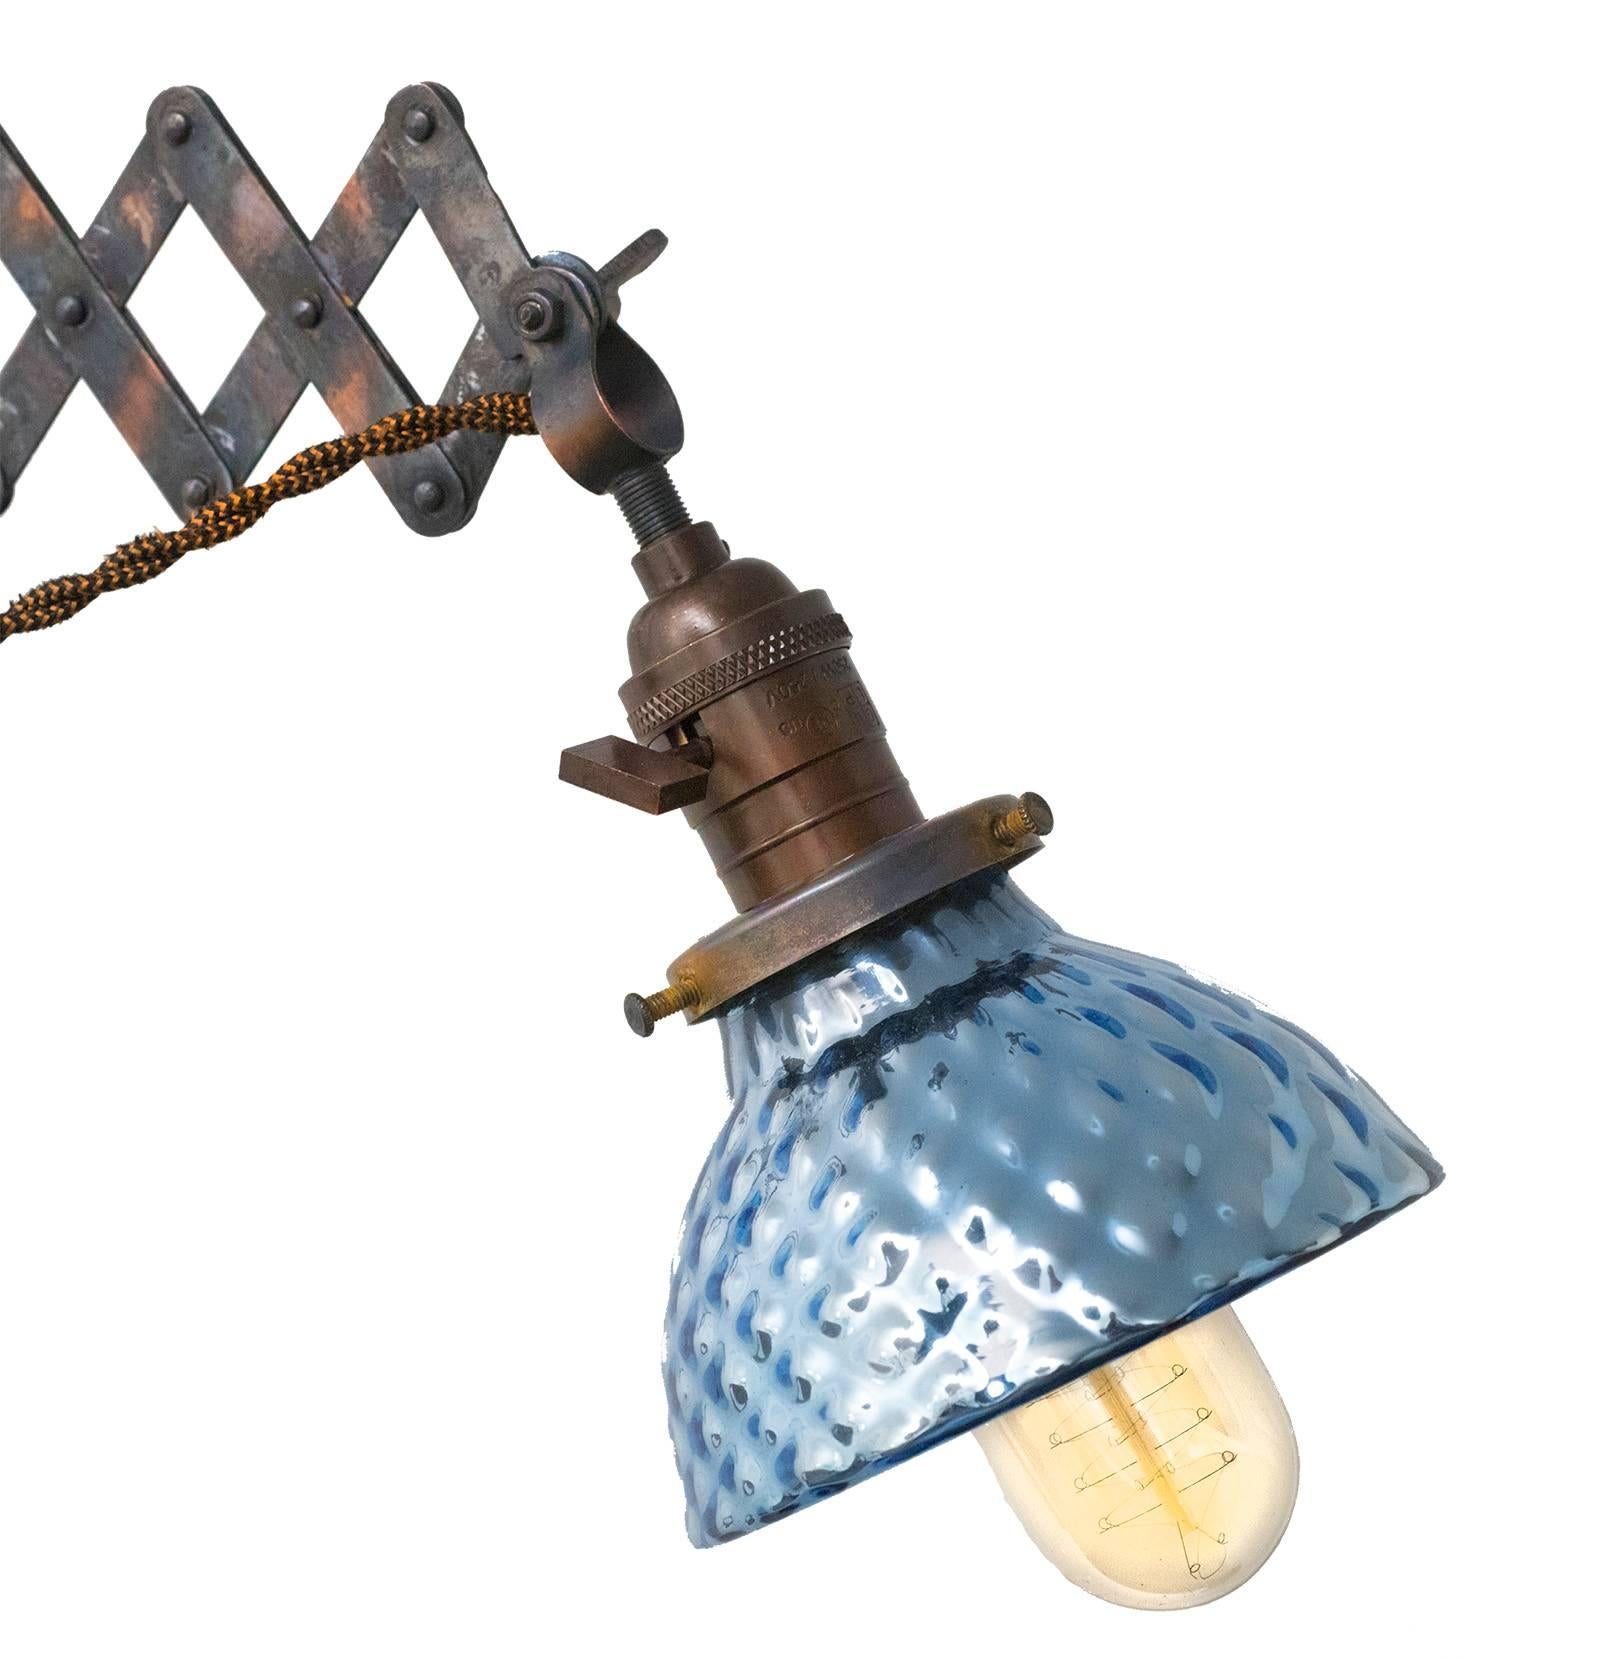 Japanned small-scale brass scissor lamp. Completely re-wired with new cord, switch and socket interior. Blue mercury glass shade is the small-scale globe (measure: approximately 5" diameter), with a piece chipped off behind the fitter.